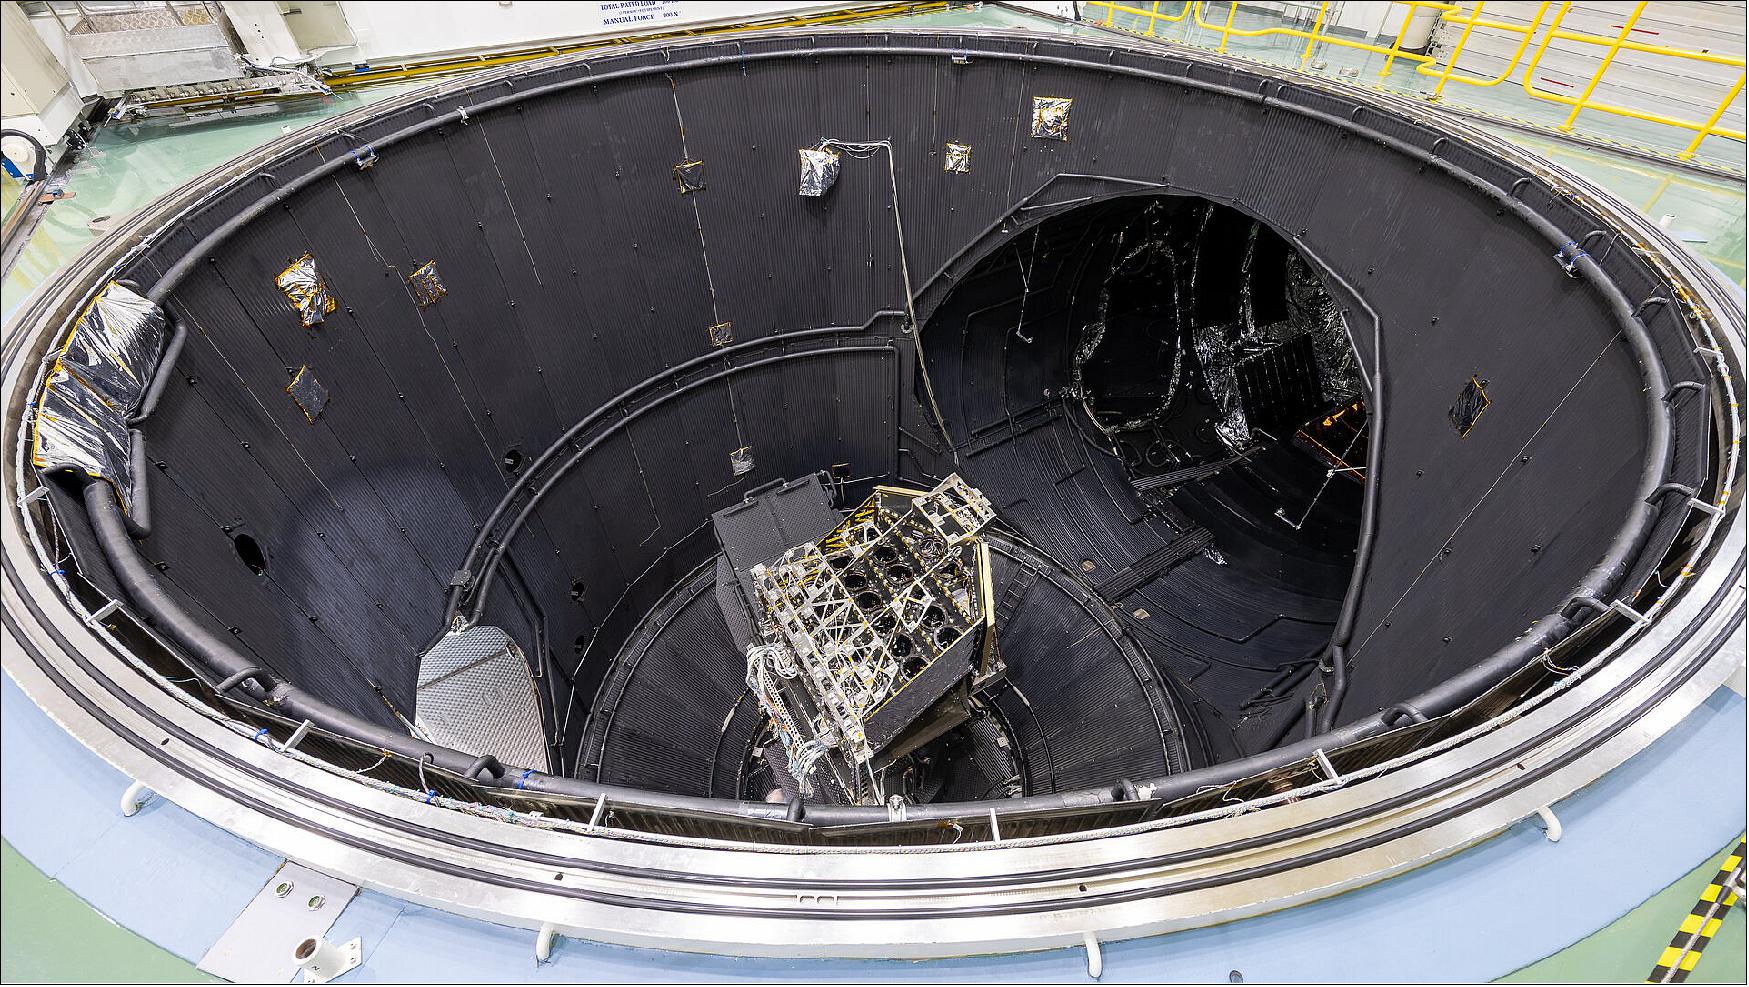 Figure 15: Plato optical bench entering the Large Space Simulator (ESTEC) for the thermos-elastic deformation test (TED) in September 2021 (image credit: ESA)